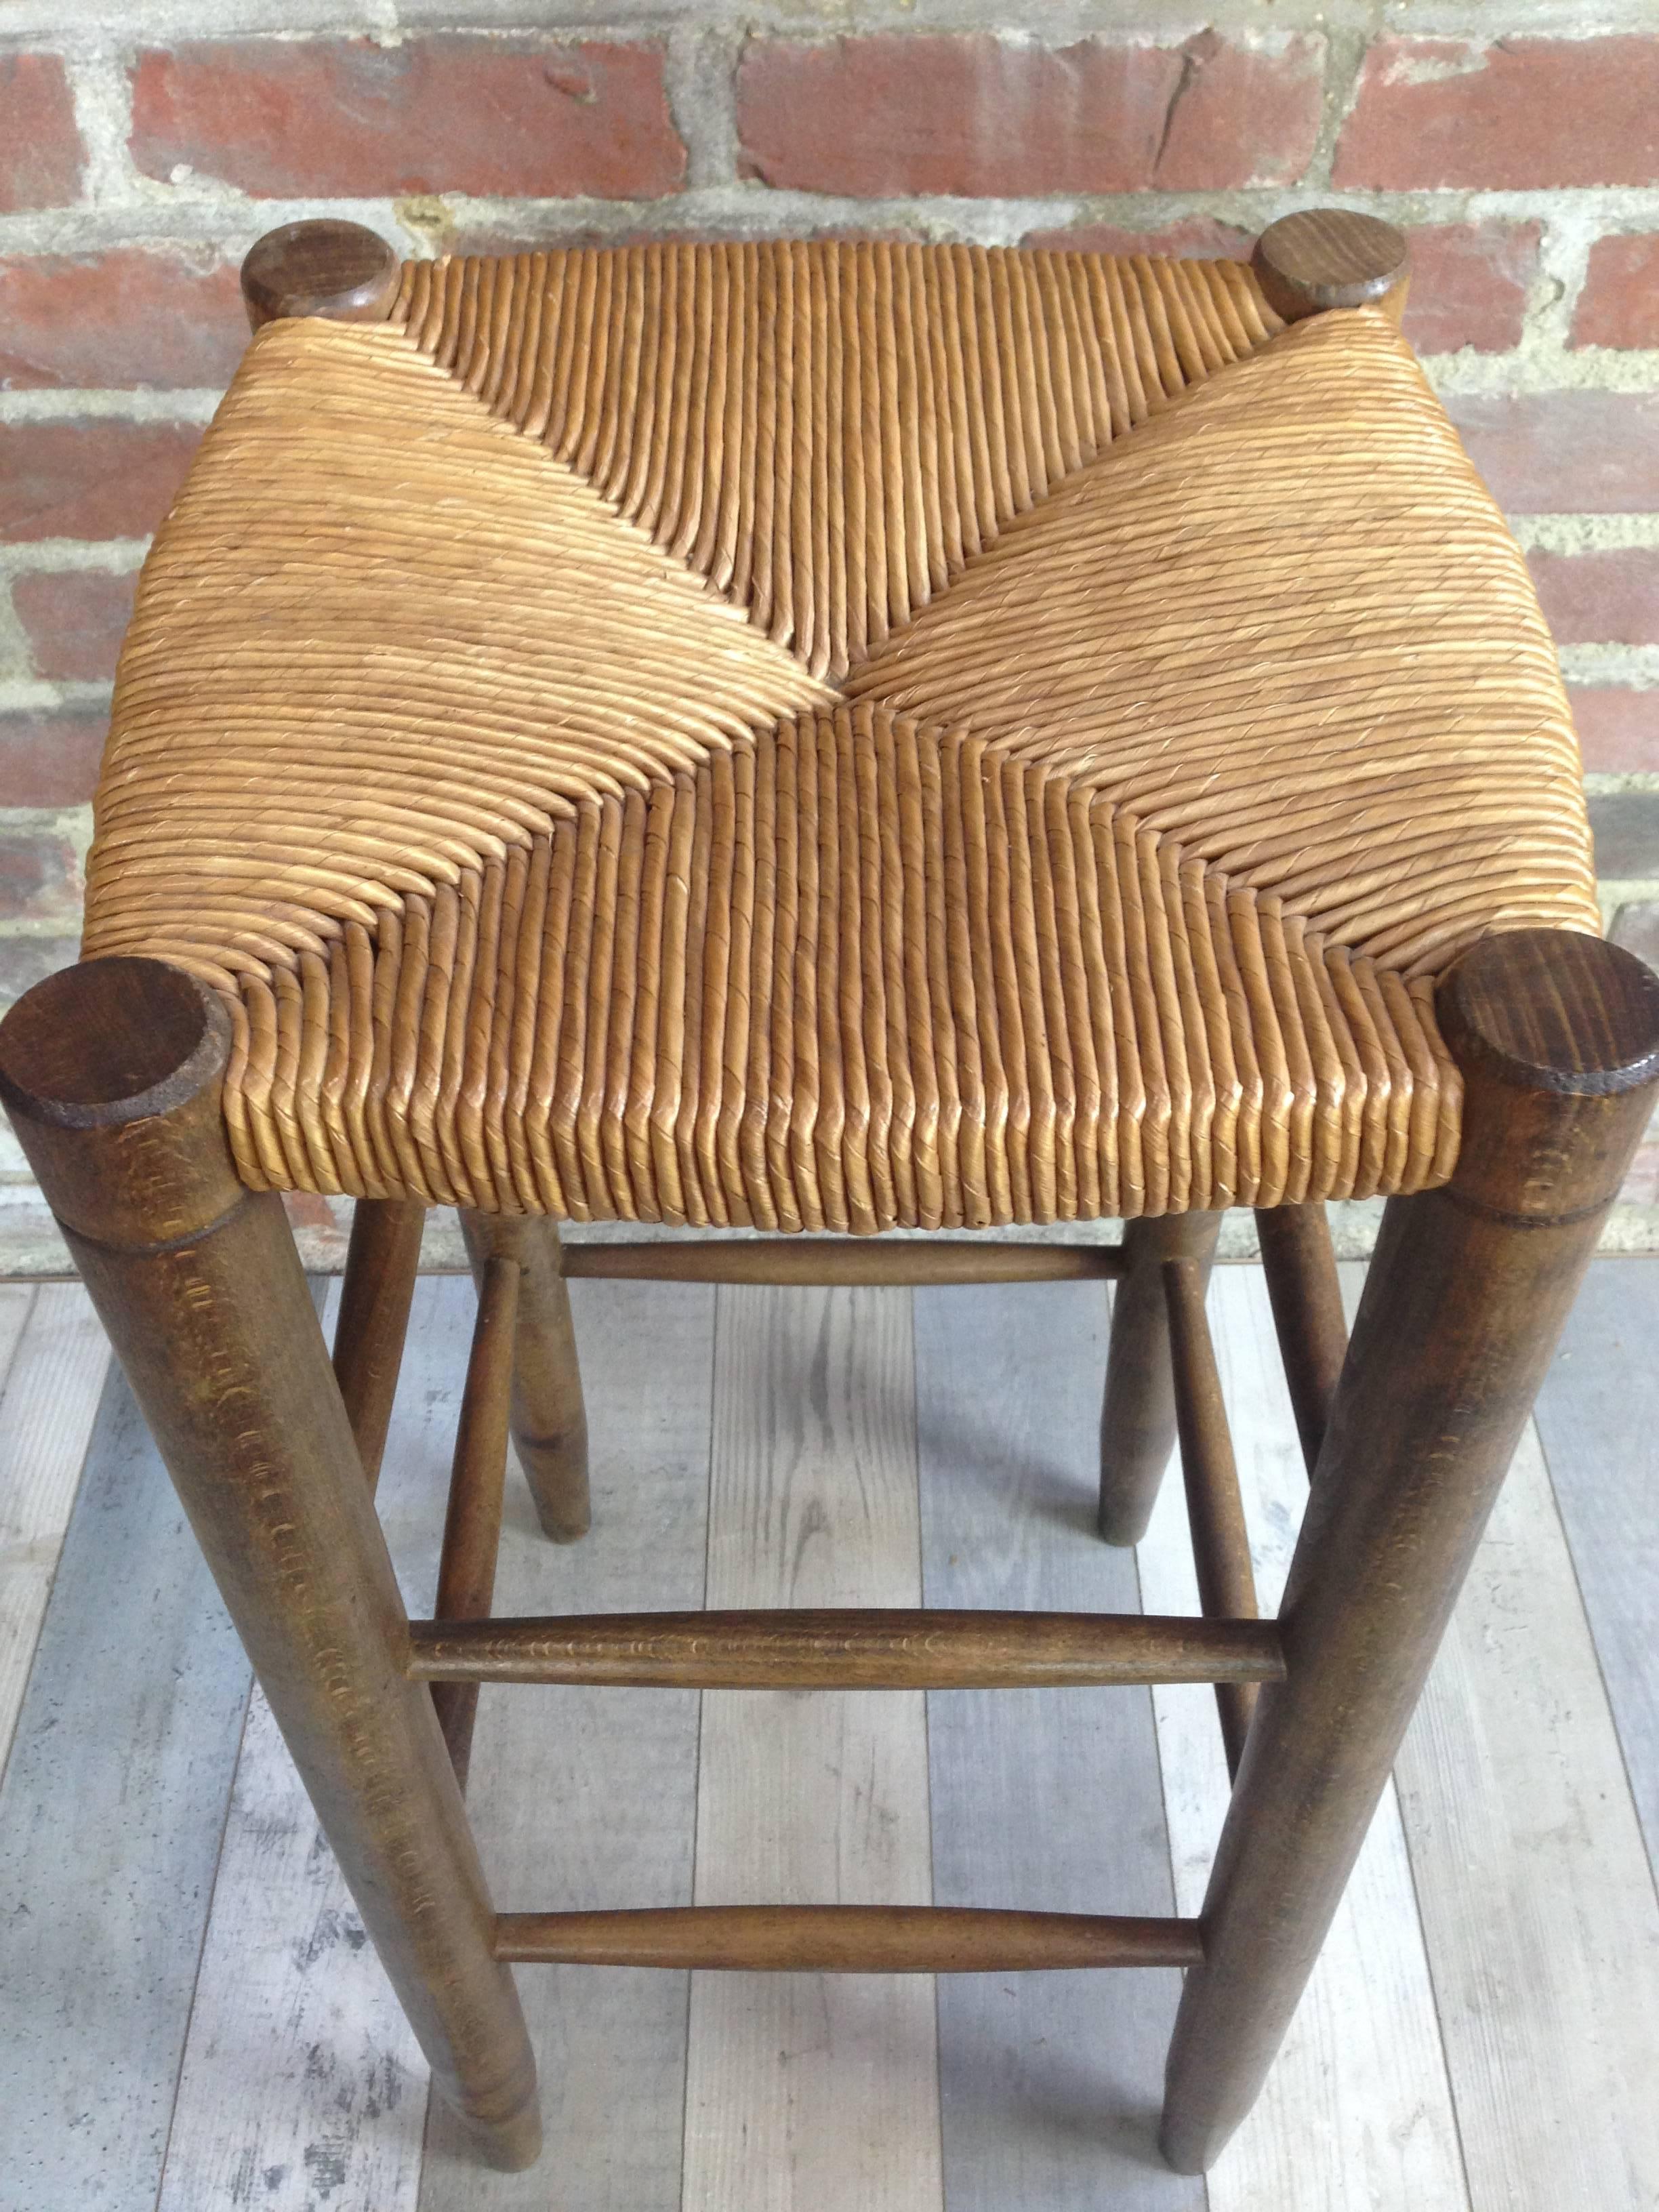 Mid-Century Modern French Design of the 1950s Wooden High Stool